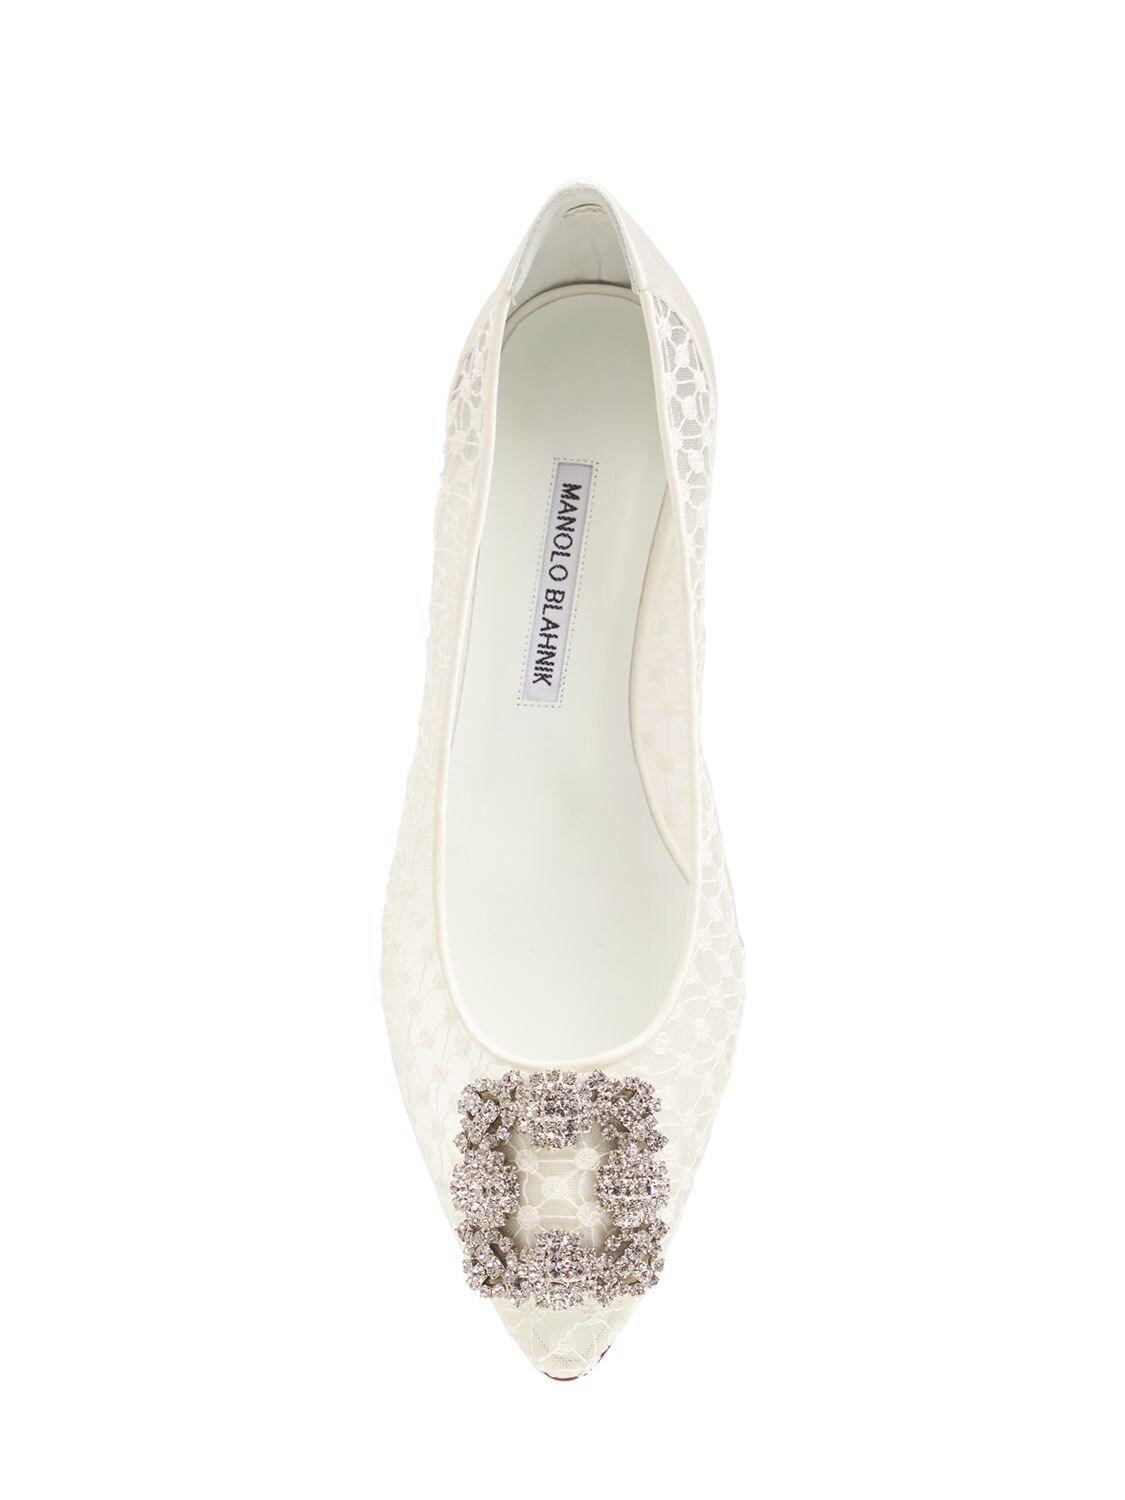 Manolo Blahnik 10mm Hangisi Lace & Satin Flats in White - Lyst